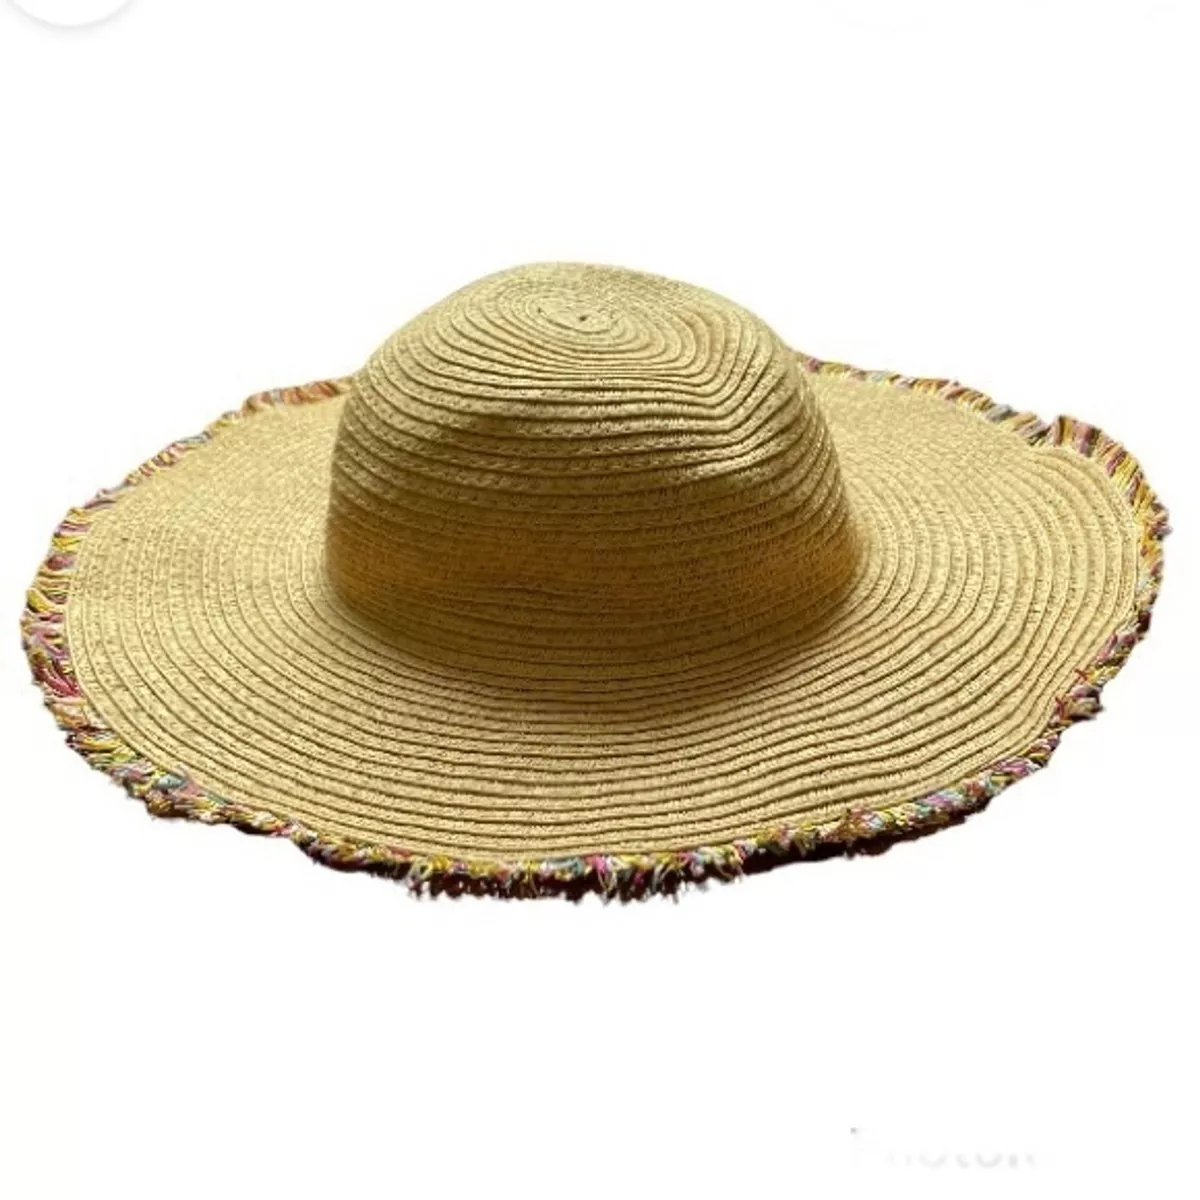 Floppy Straw Sun Beach Hat- Small by Old Navy